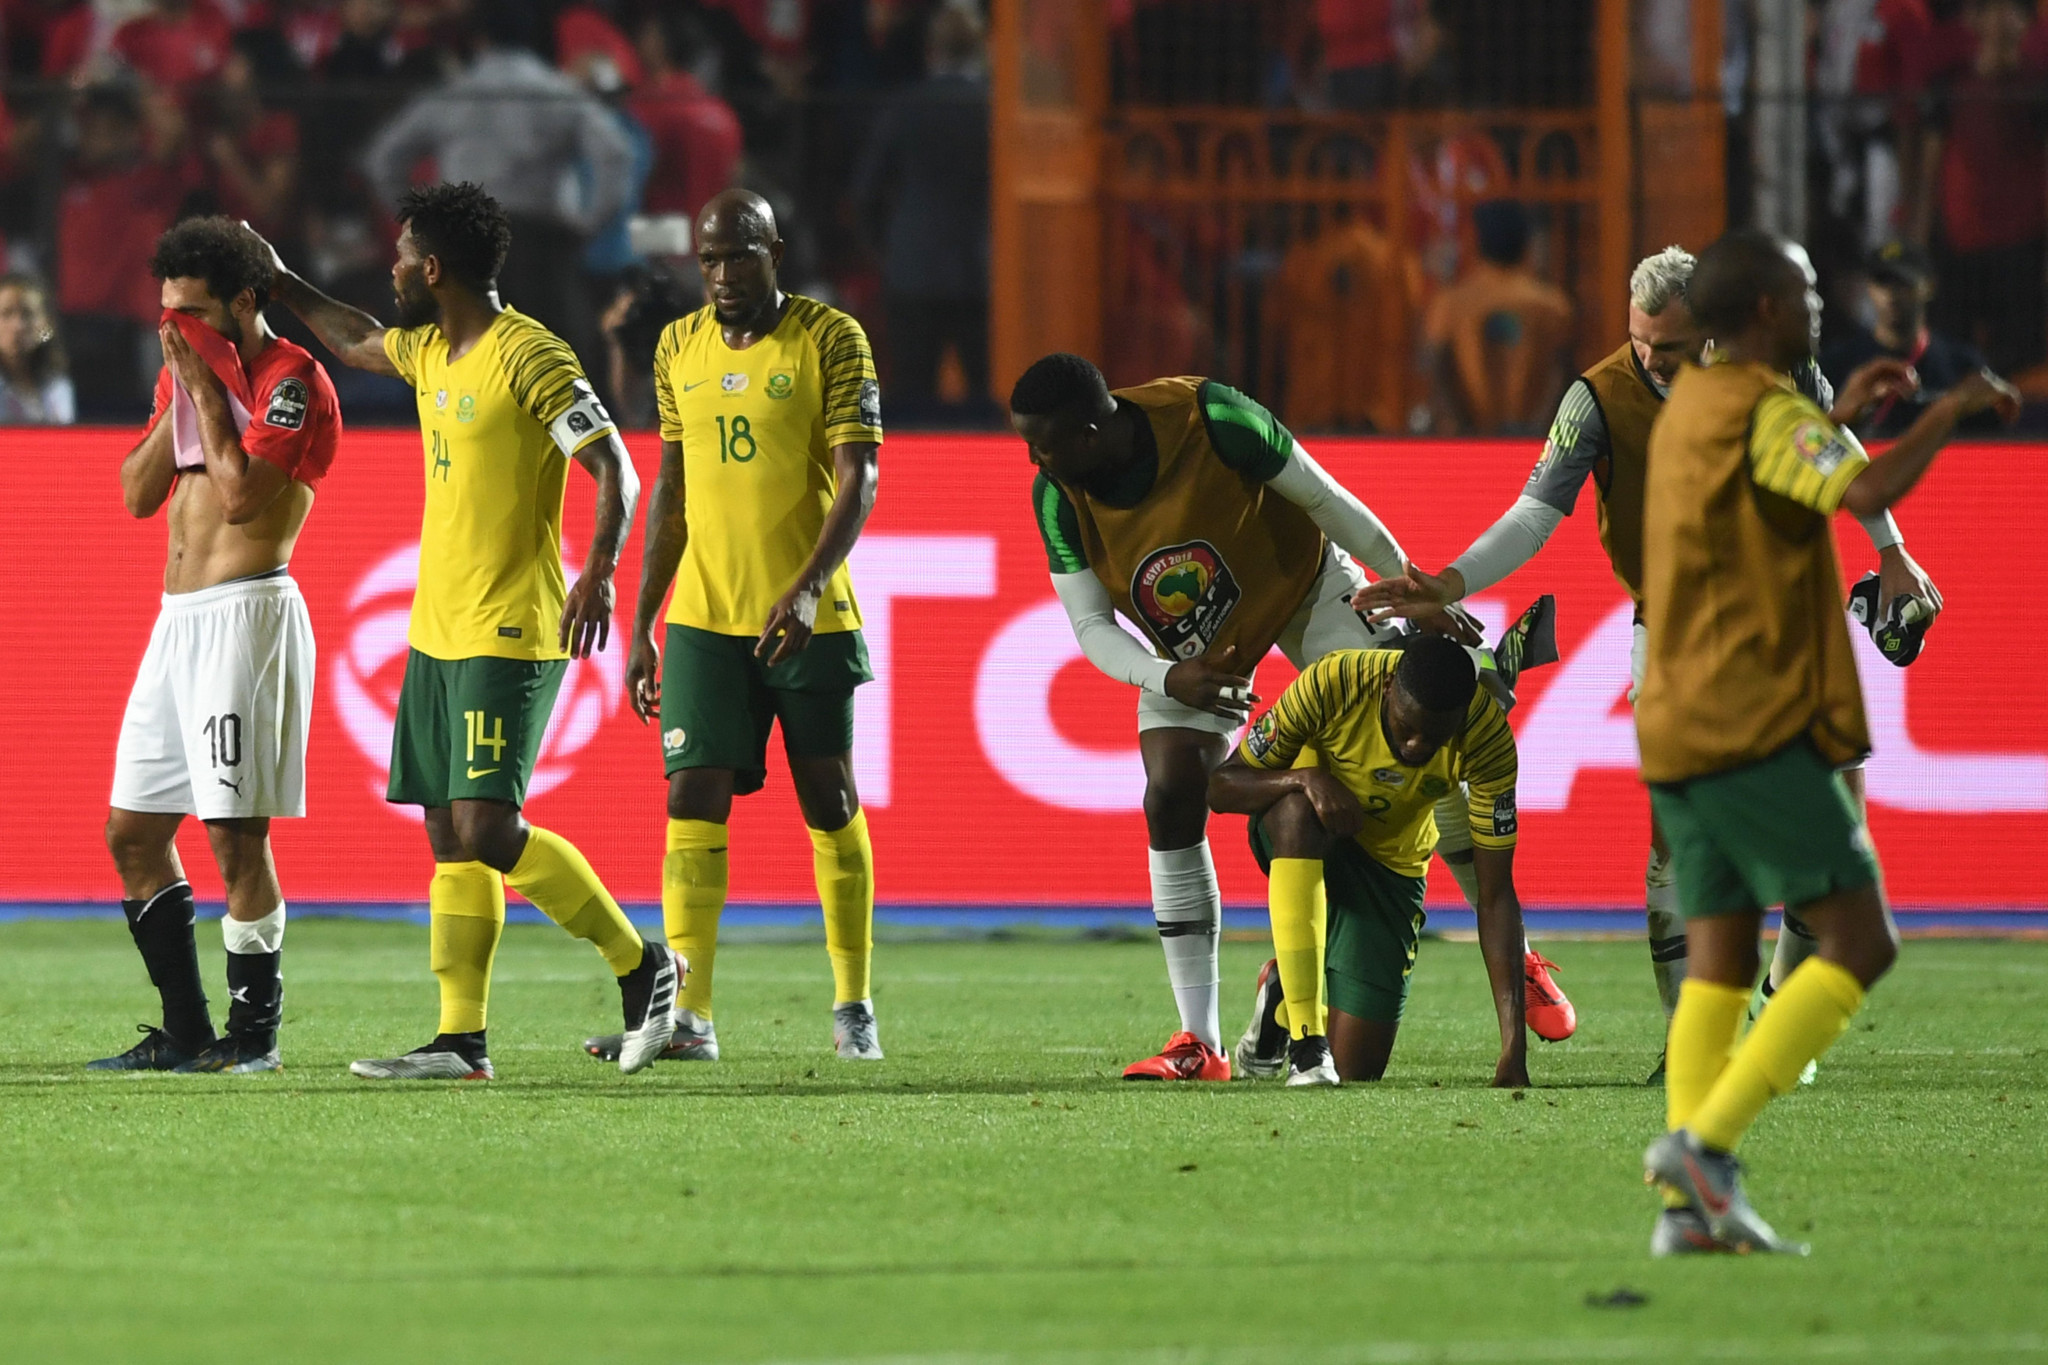 Mohamed Salah, left, and Egypt were upset by South Africa in the Round of 16 at the 2019 African Cup of Nations, after which EFA President Hany Abou Rida and the entire board resigned ©Getty Images